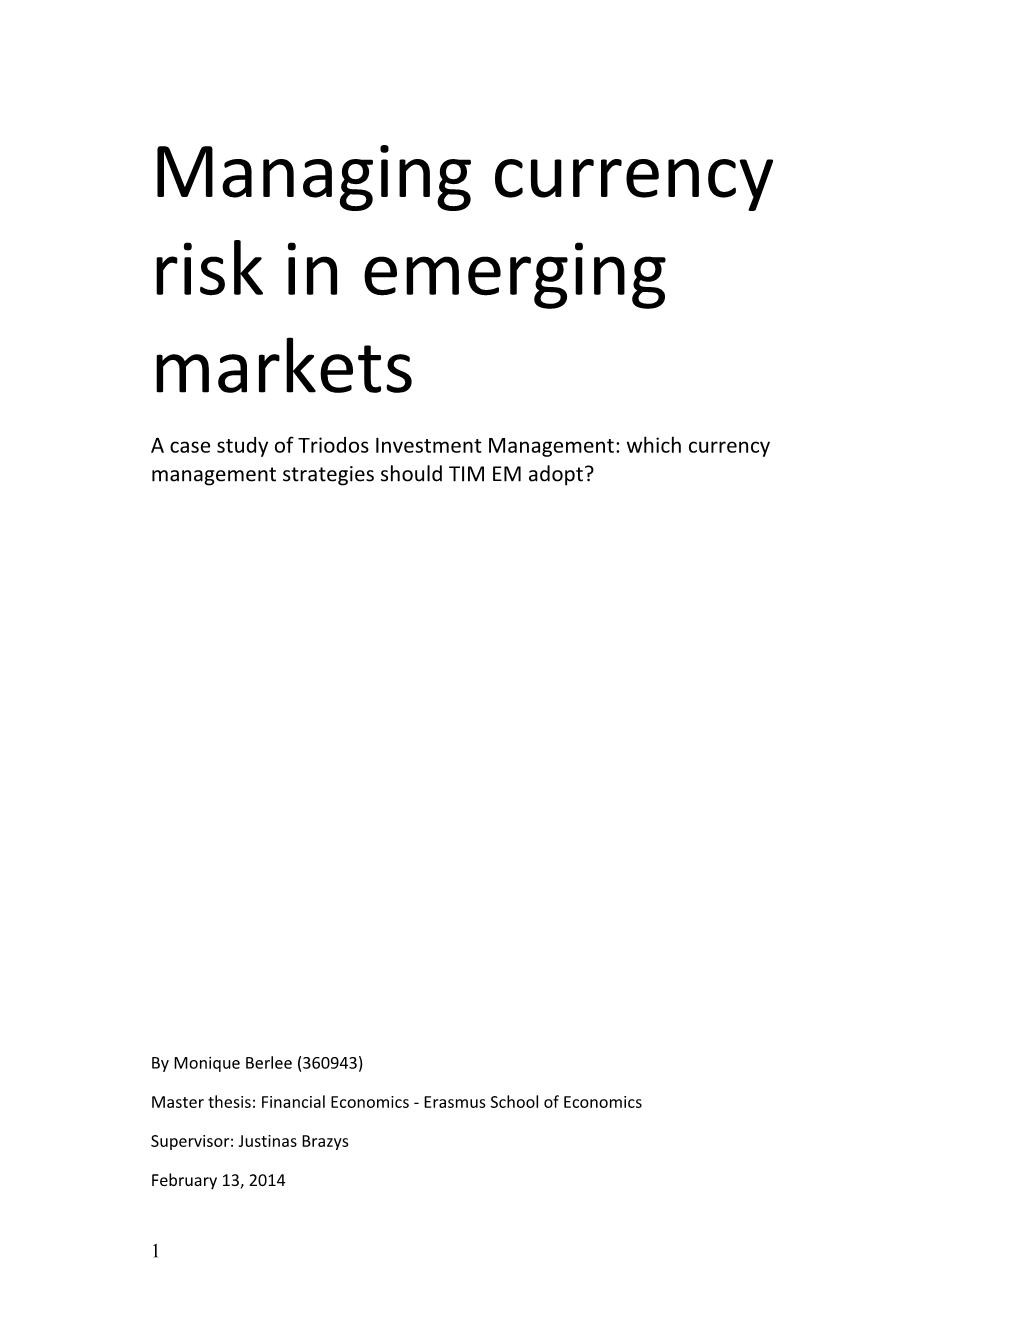 Managing Currency Risk in Emerging Markets